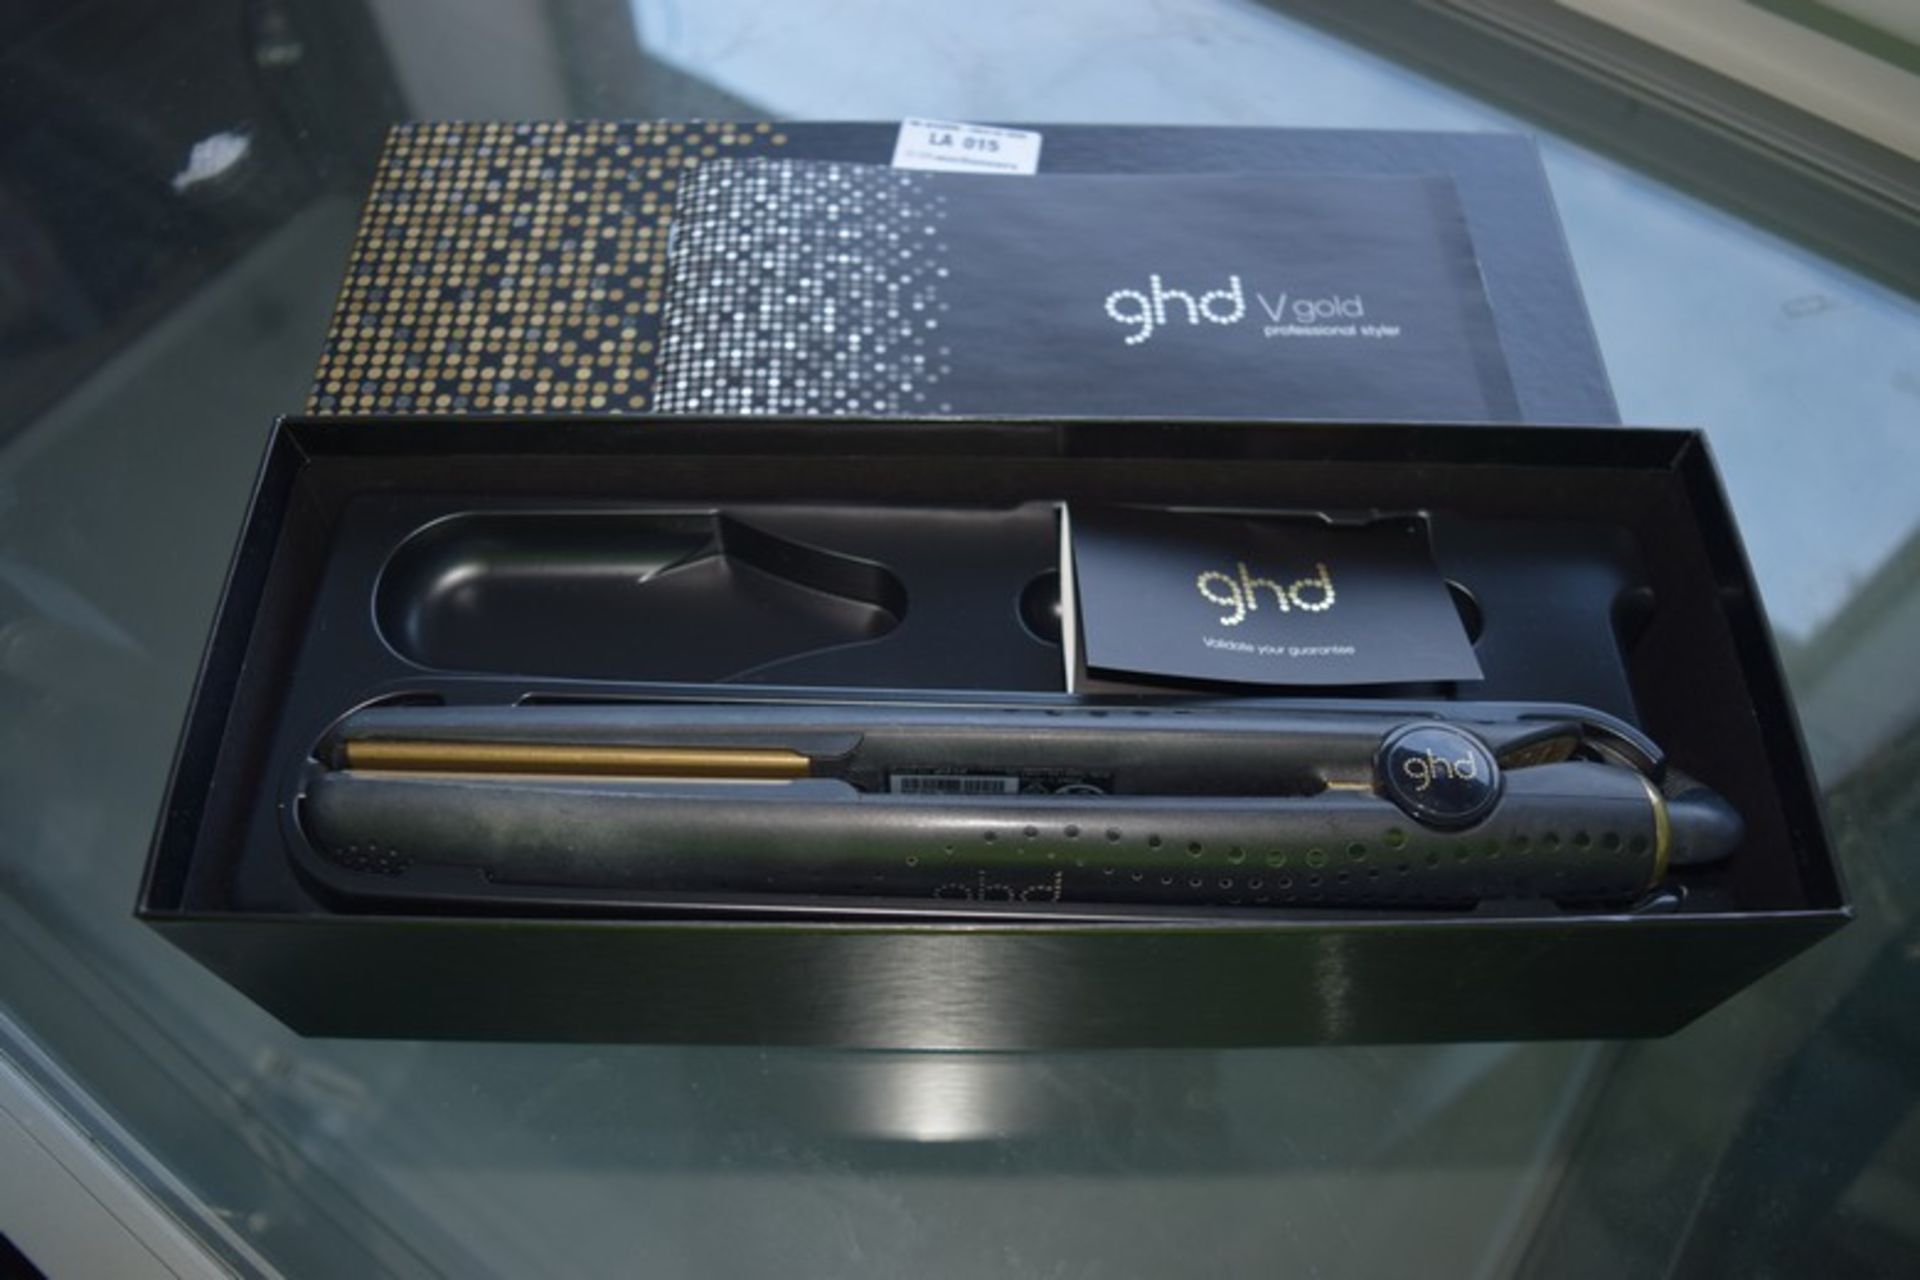 1 x BOXED GHD V GOLD PROFESSIONAL STYLER RRP £145 (14.11.2016) *PLEASE NOTE THAT THE BID PRICE IS